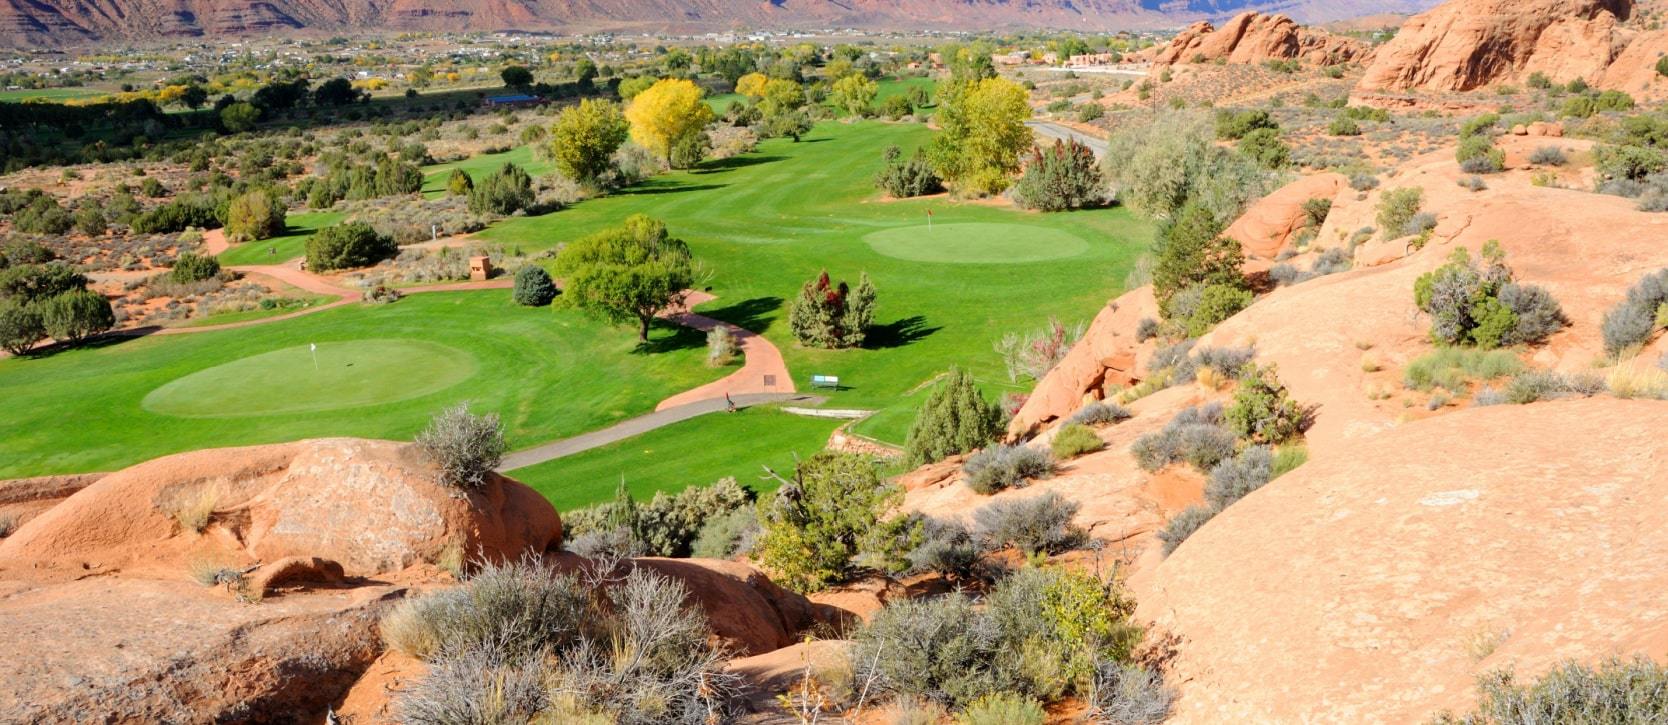 Panoramic shot of golf course in Southern Utah